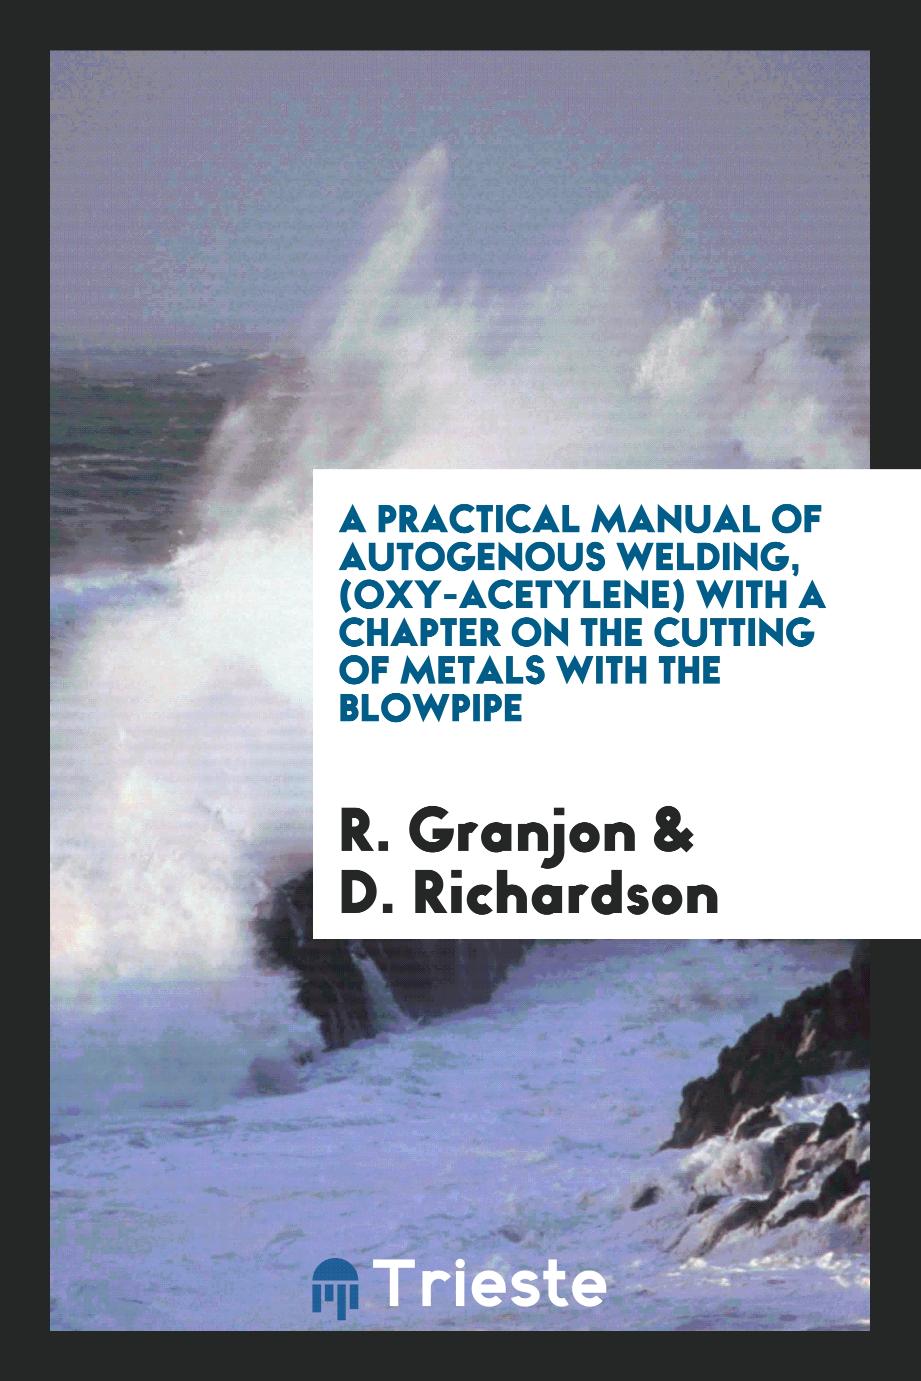 A practical manual of autogenous welding, (oxy-acetylene) with a chapter on the cutting of metals with the blowpipe